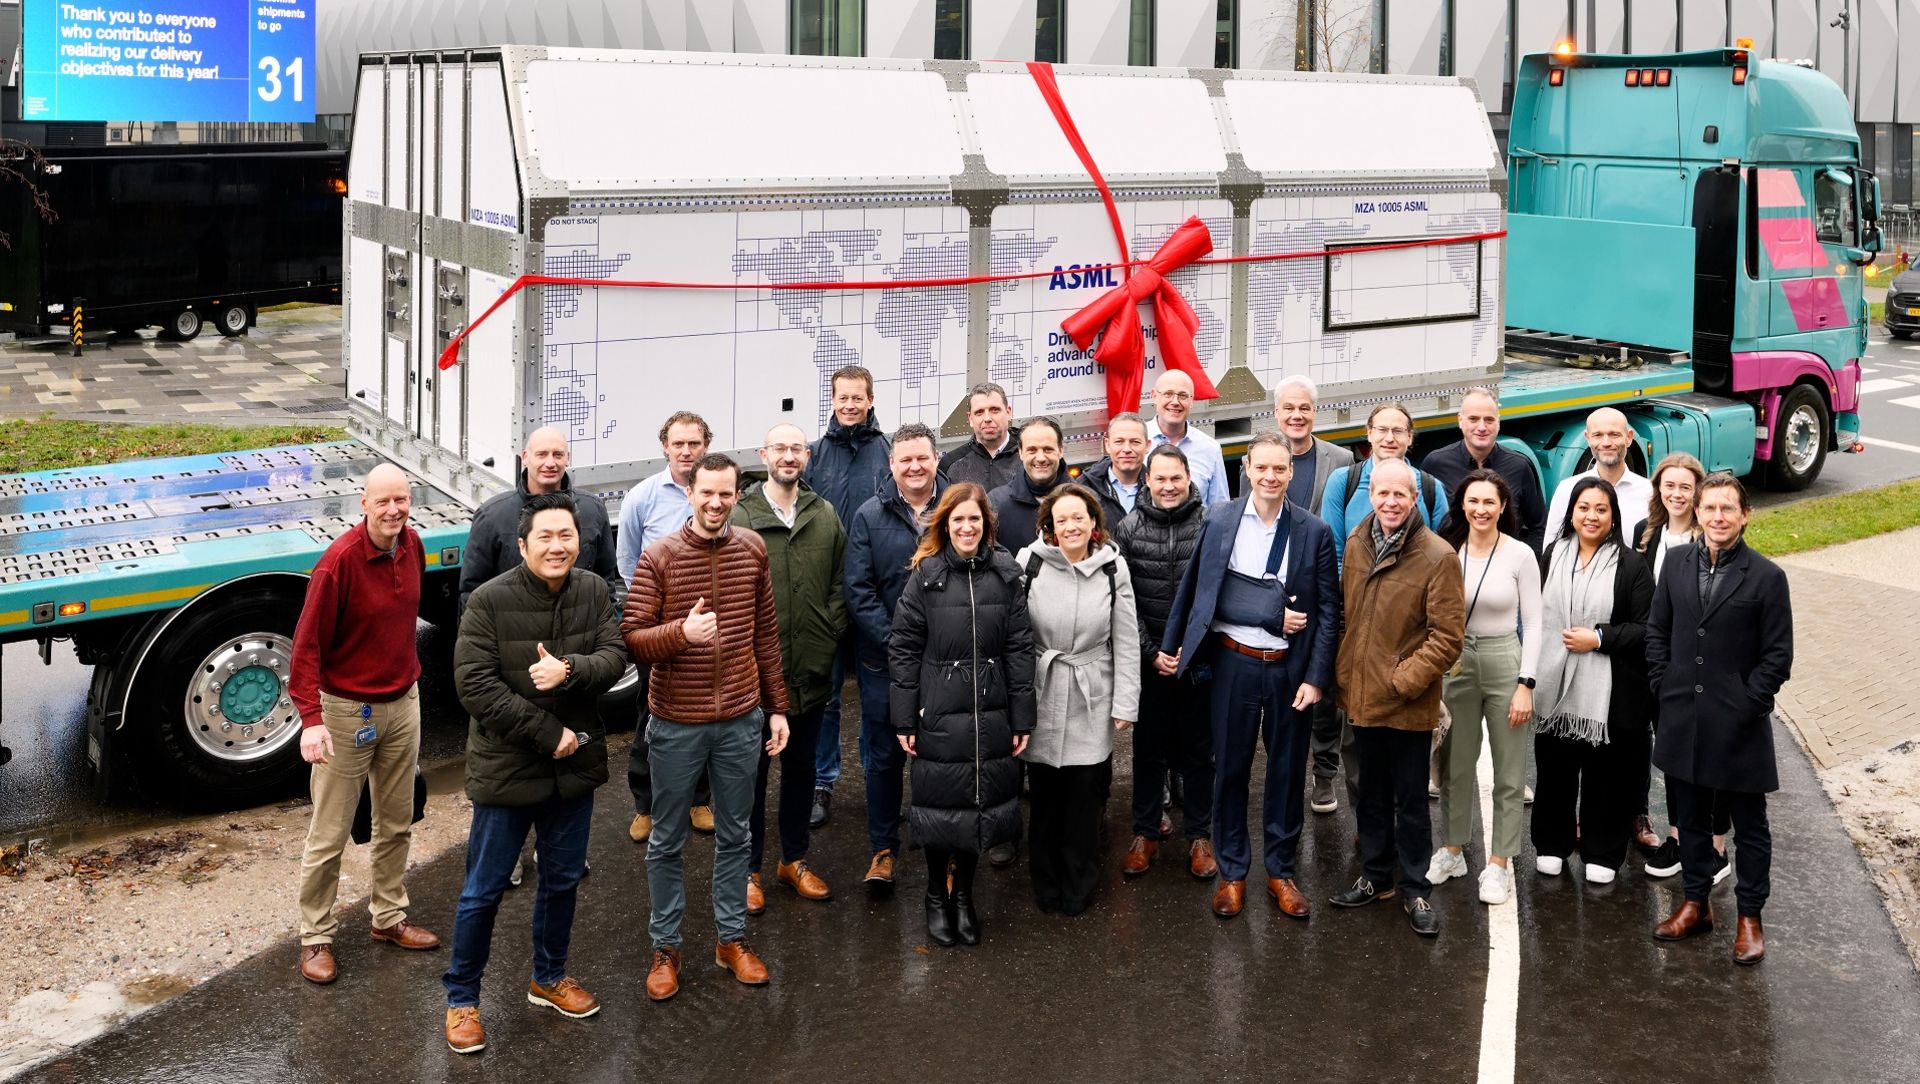 Asml employees in front of the device inside the shipping container